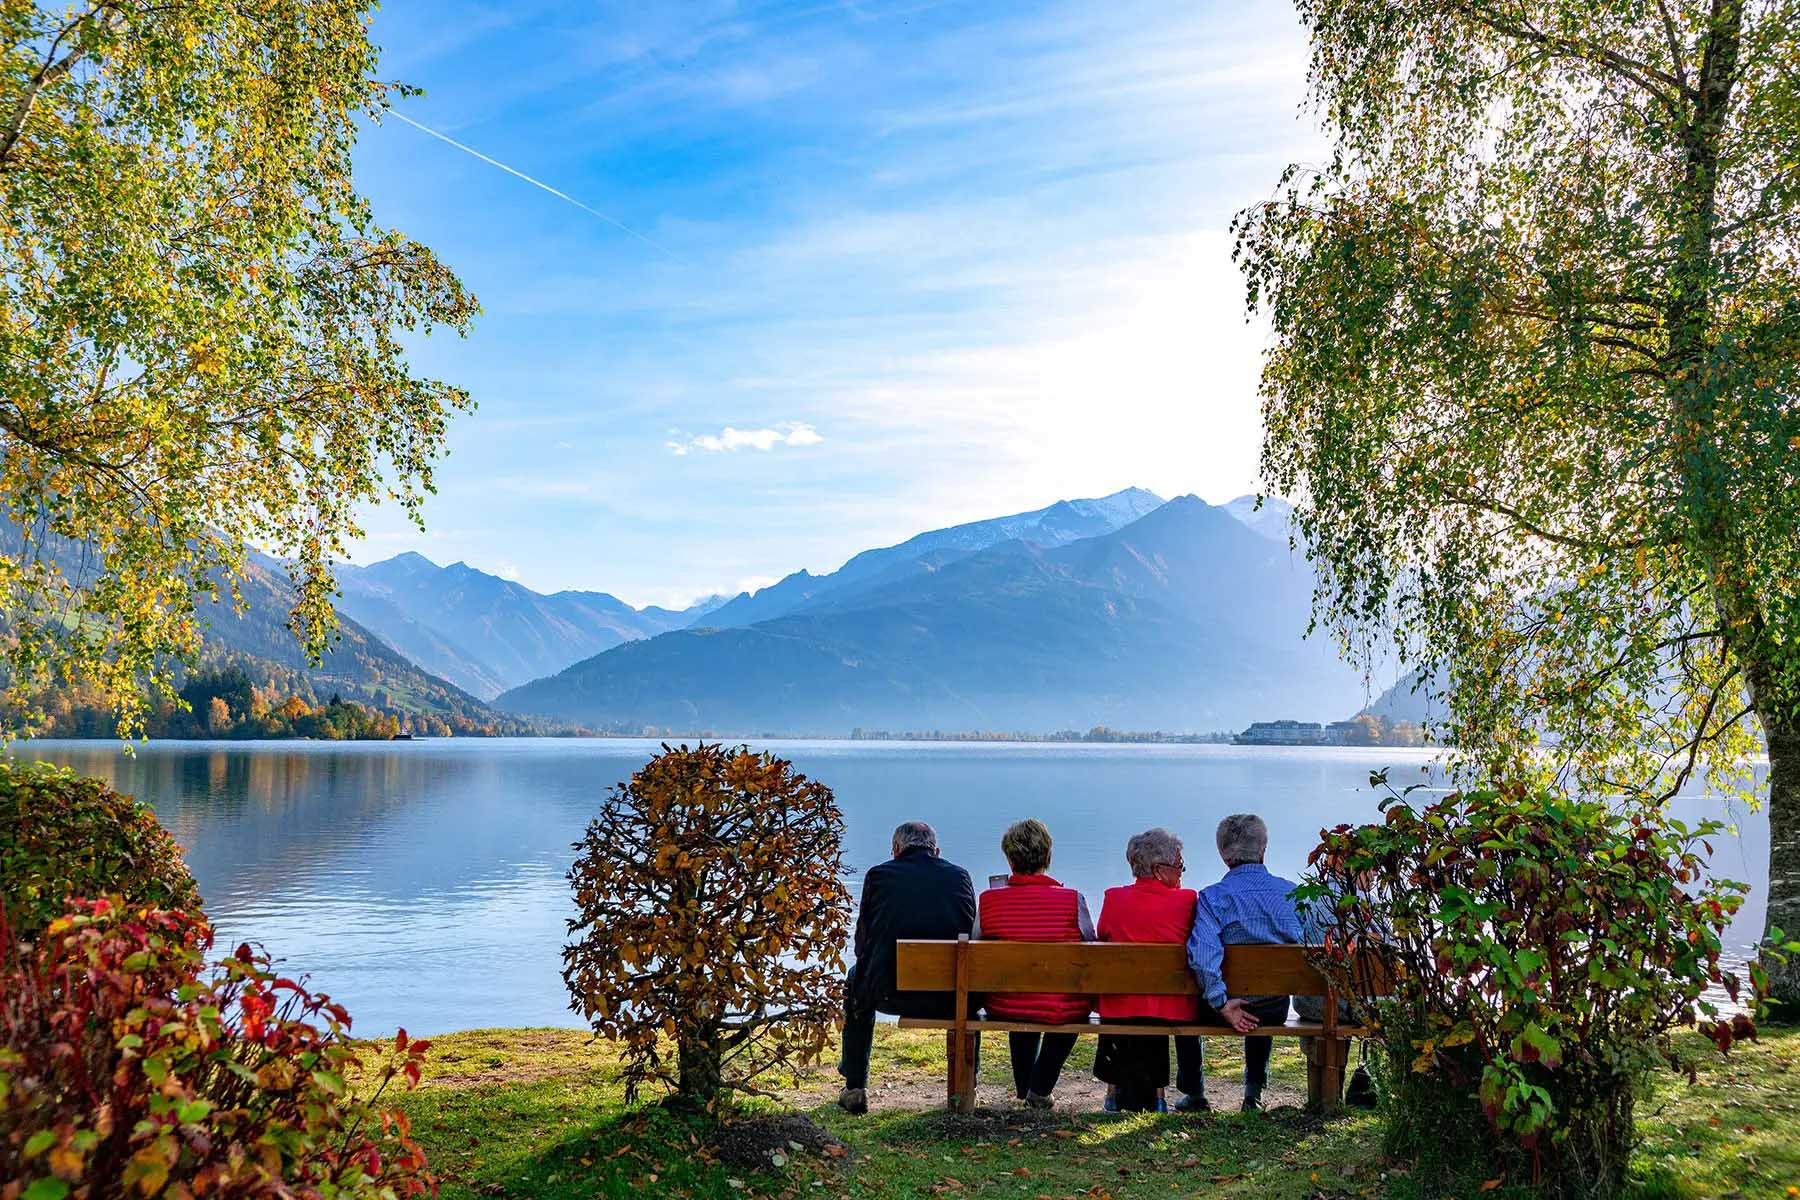 Five retirees sharing a bench overlooking a lake in Salzkammergut, Austria